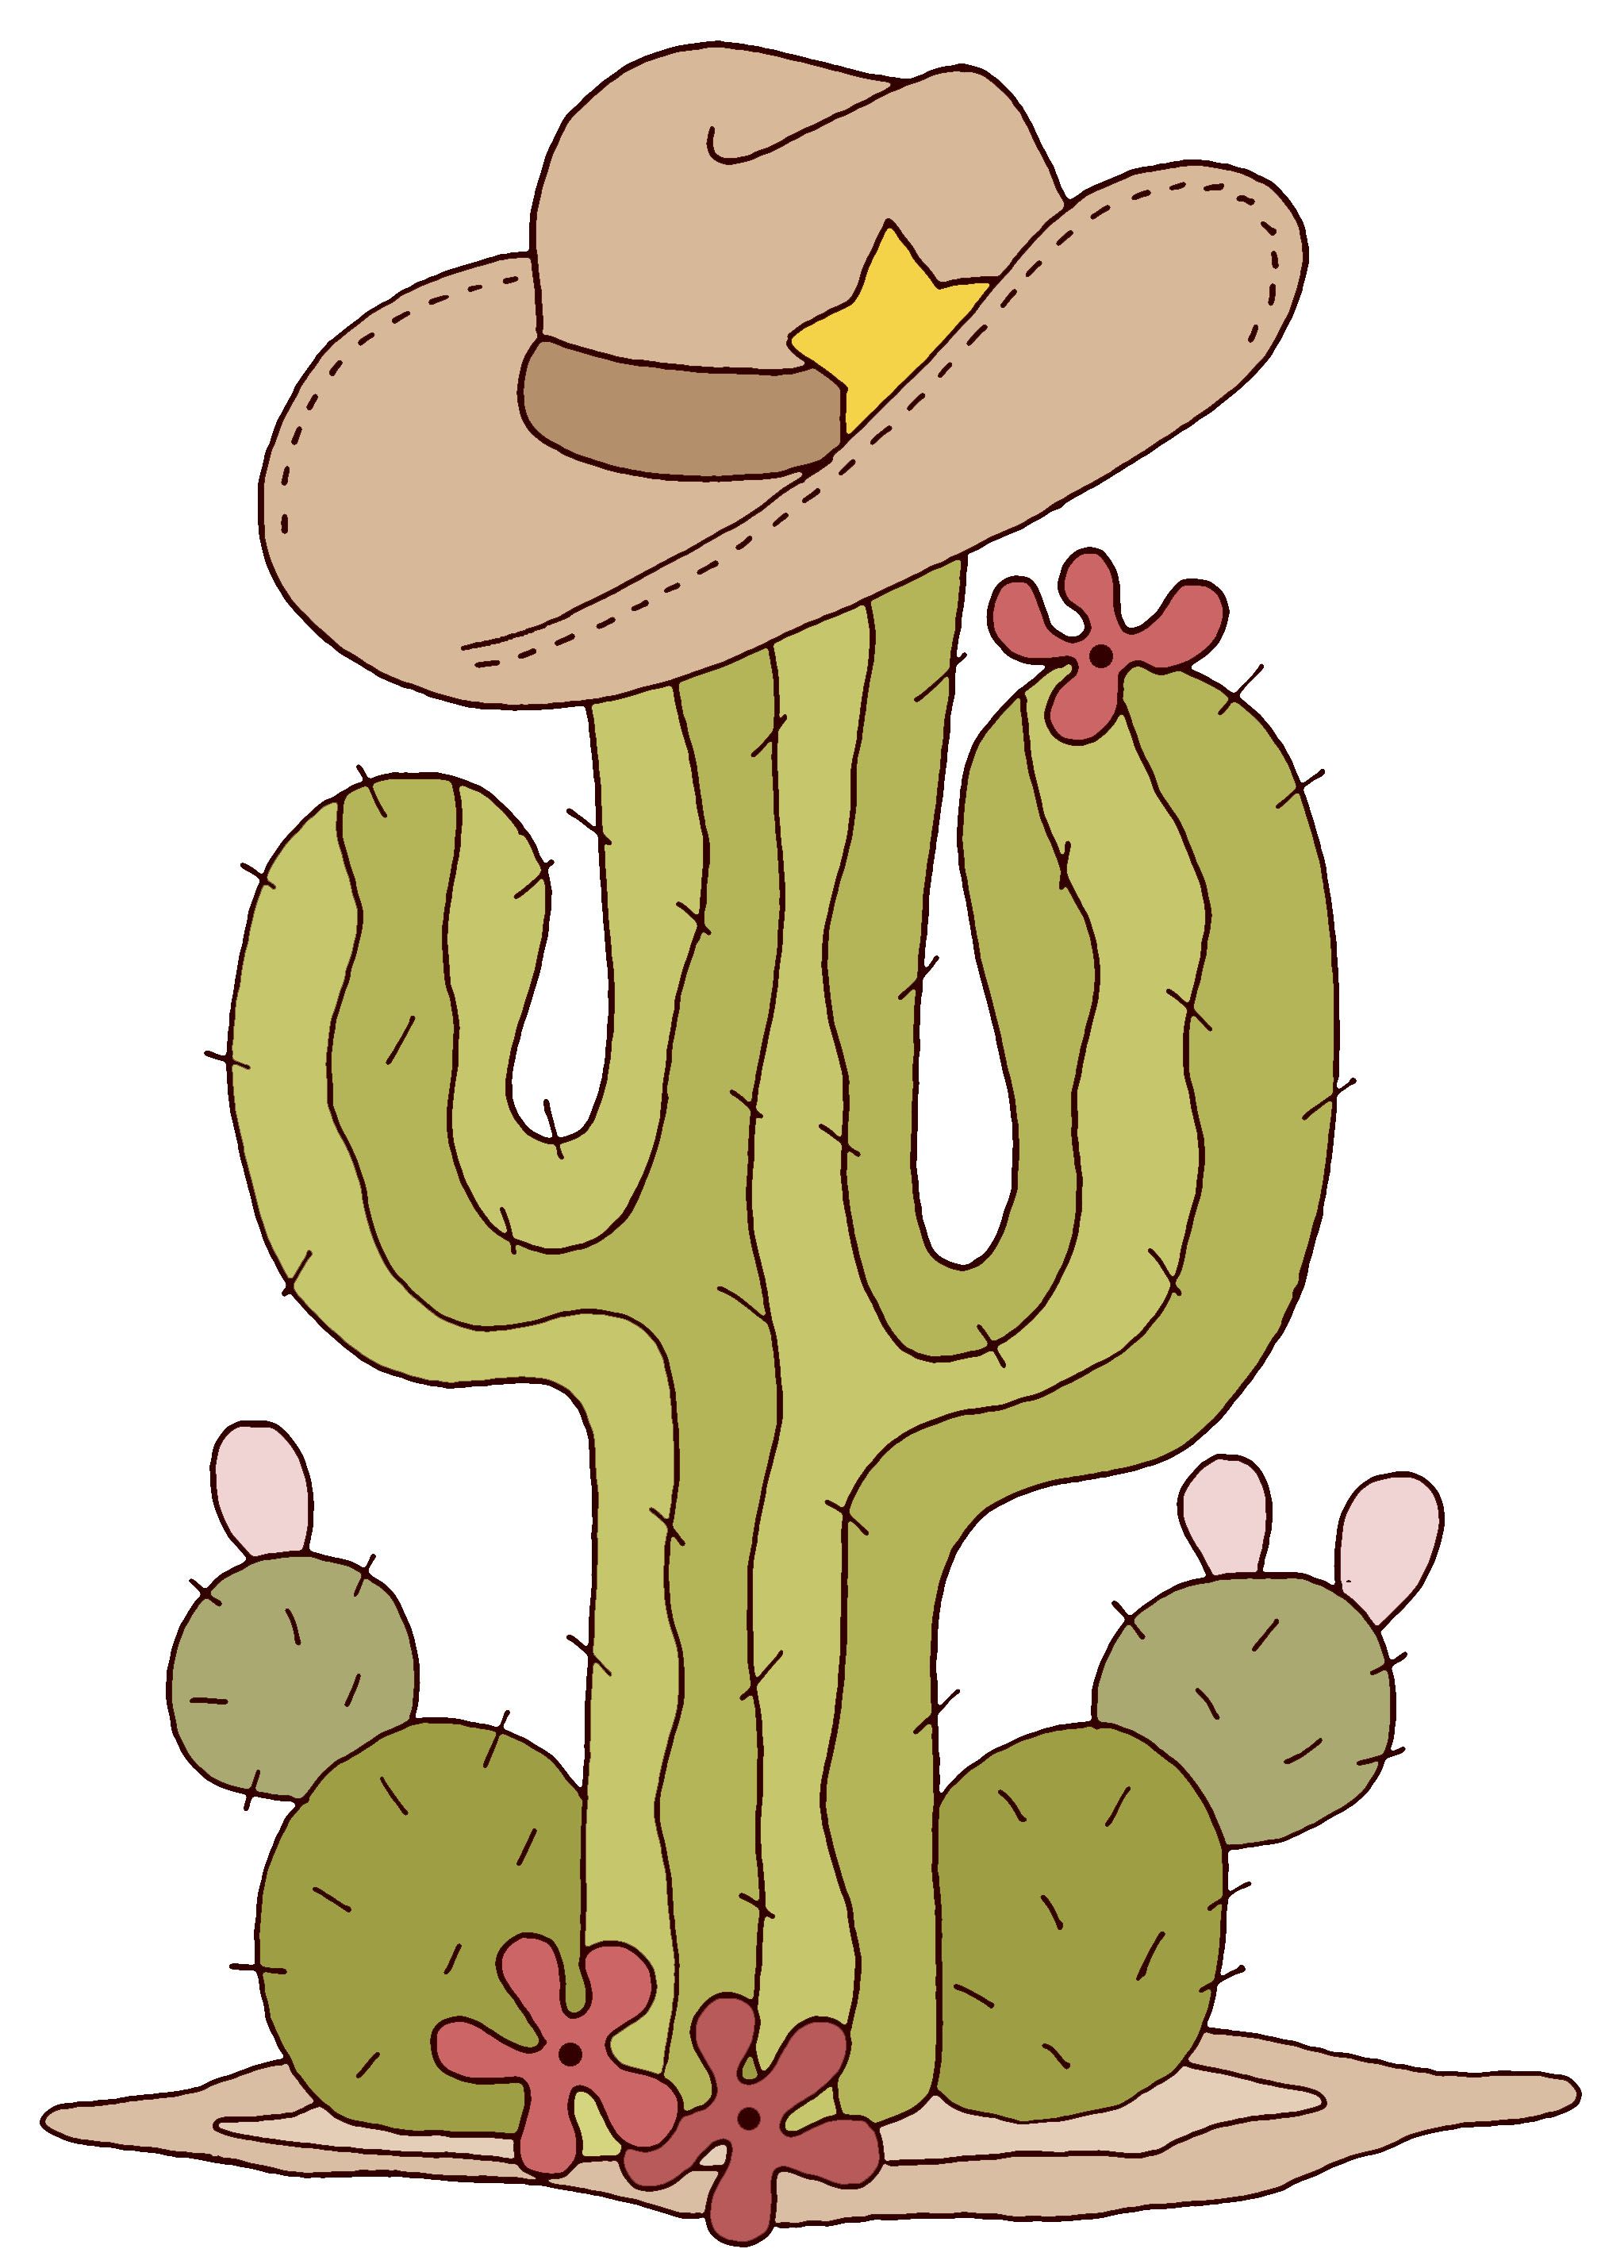 Cactus clipart cowboy. Pin by f tima